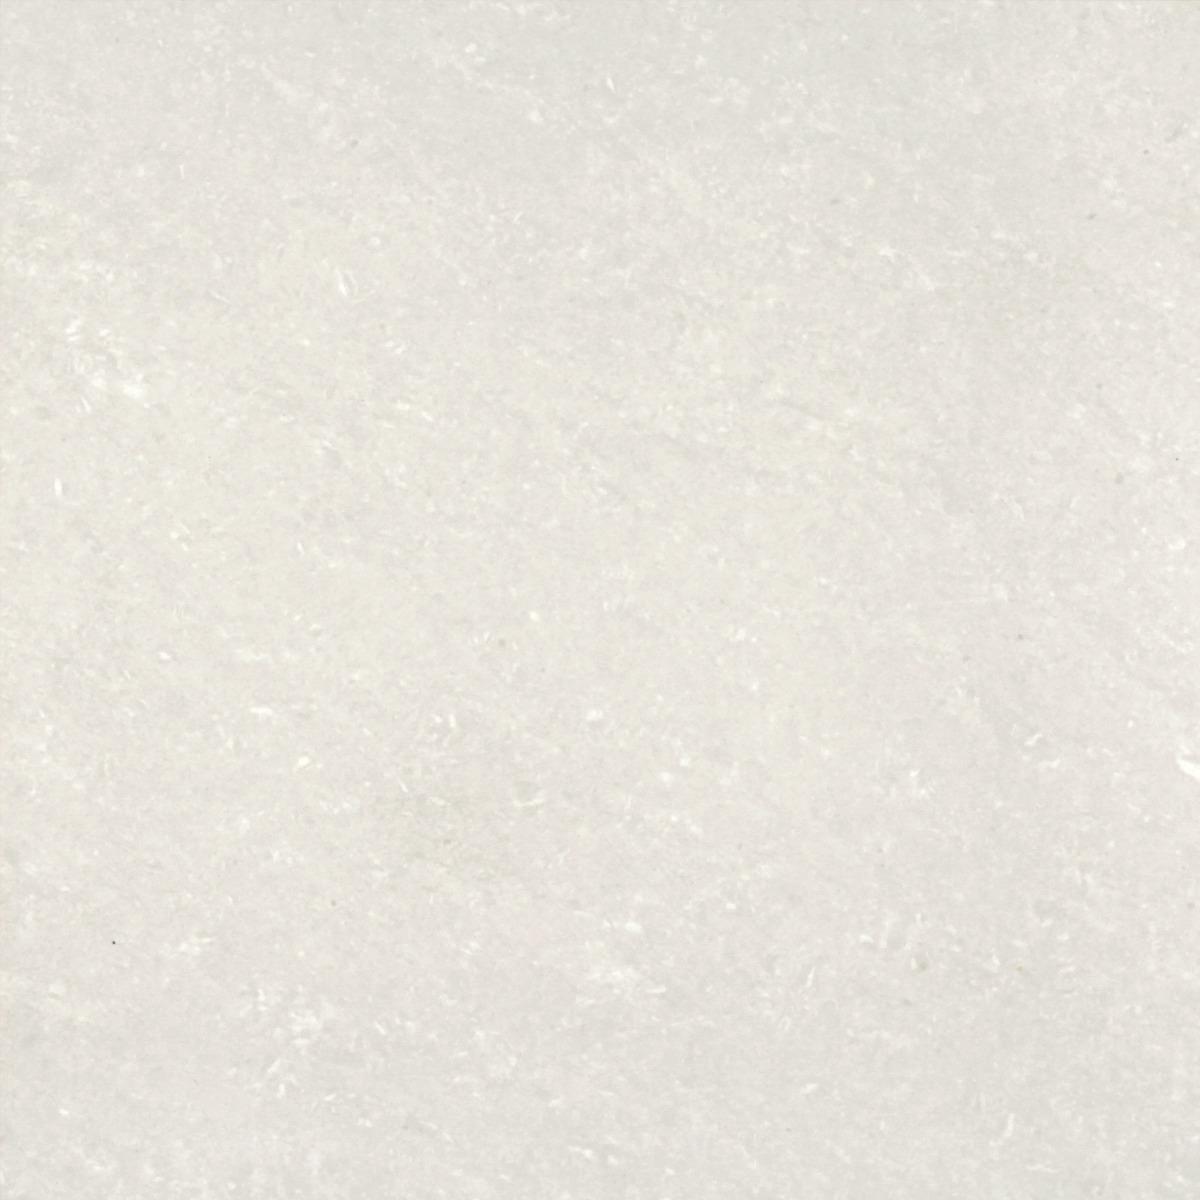 Marble Tiles for Bathroom Tiles, Living Room Tiles, Pathway Tiles, High Traffic Tiles, Commercial/Office, Outdoor Area